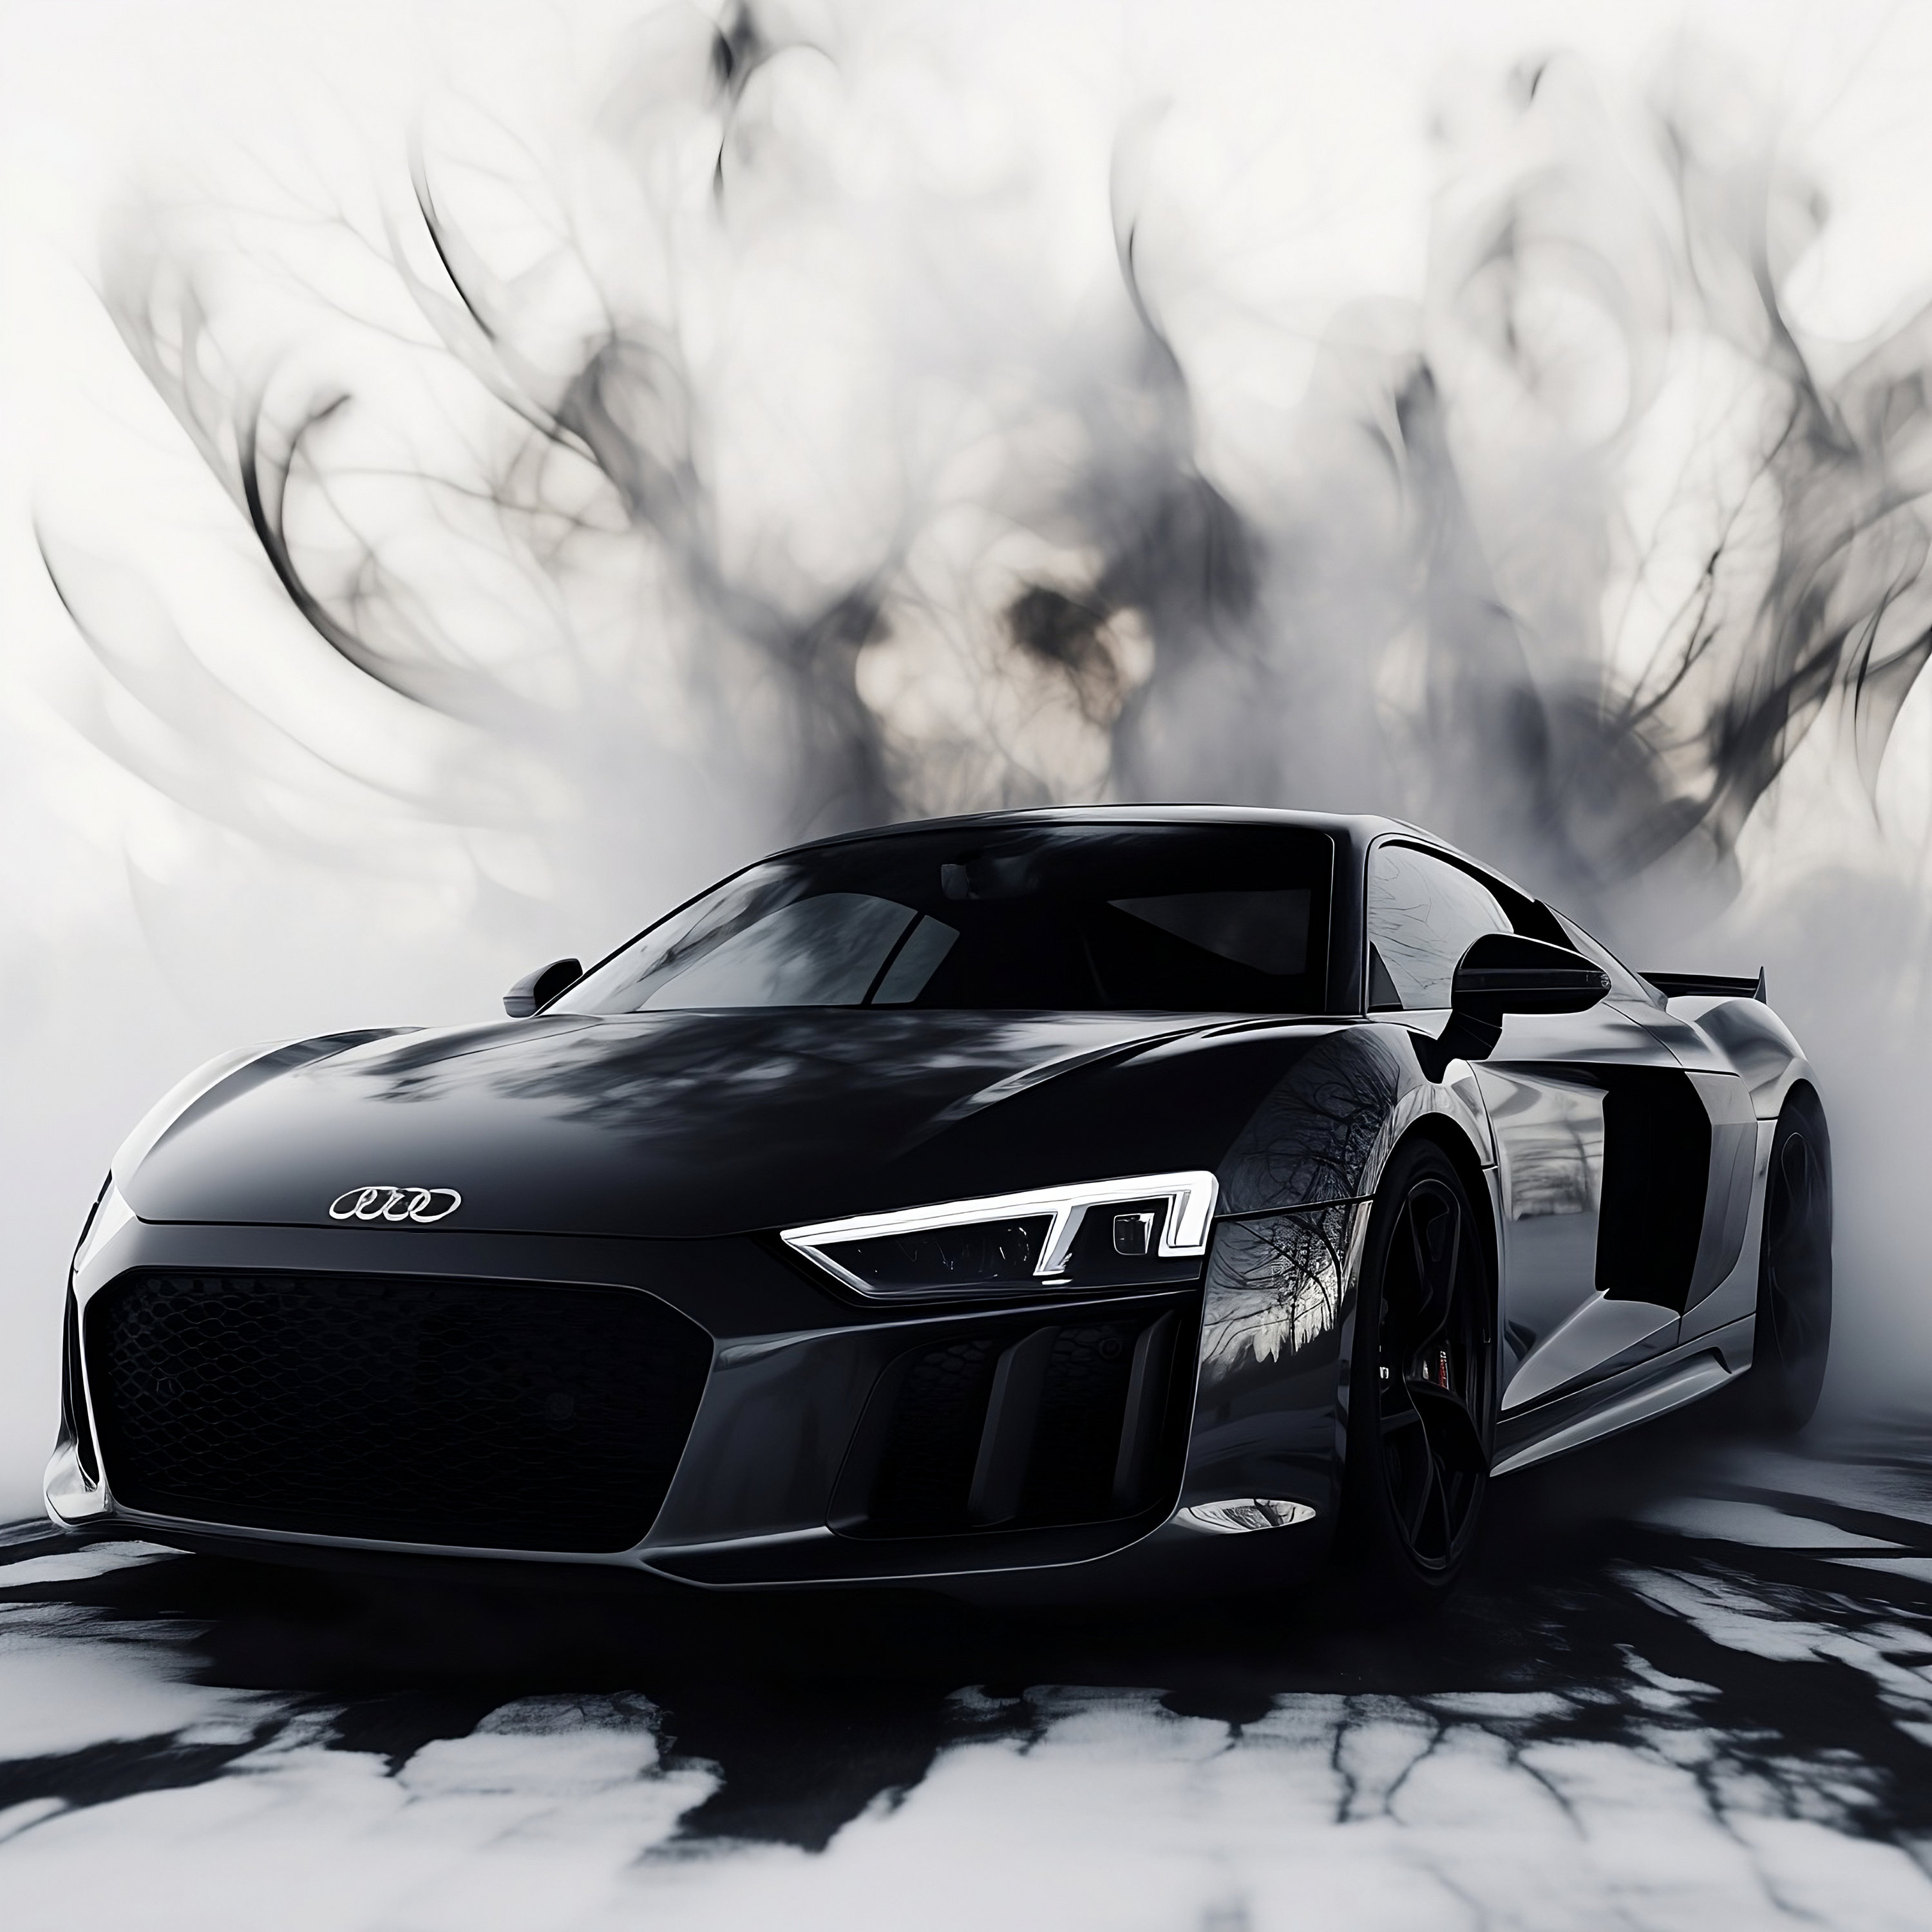 Buy Black Sleek Audi R8 Minimalist Abstract Sports Car in Garage With Black  and White Abstract Background DIGITAL DOWNLOAD Online in India 